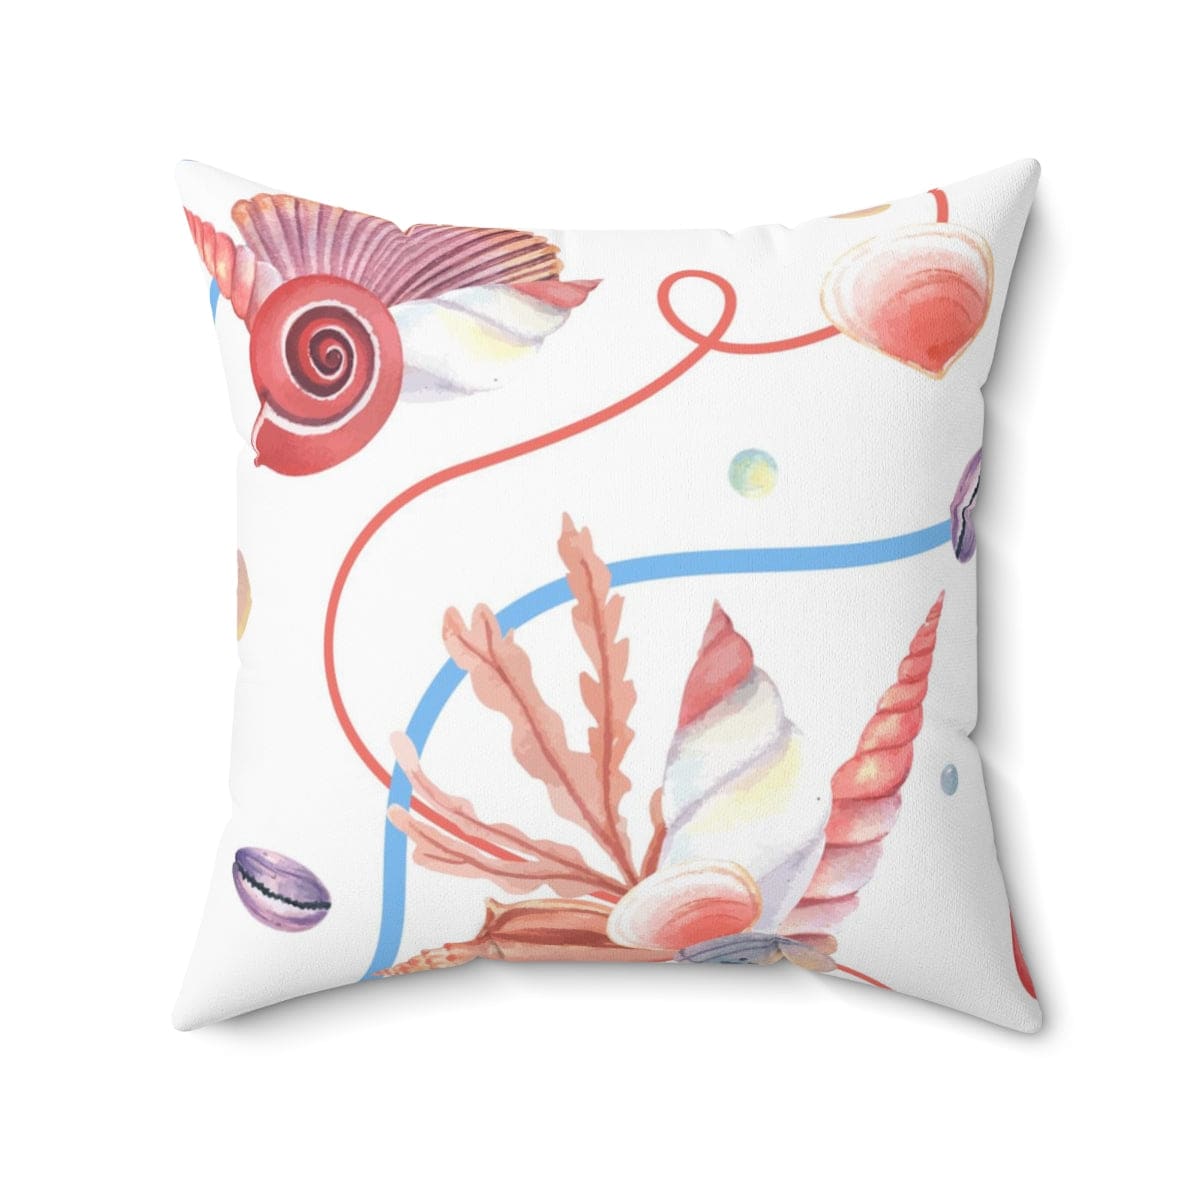 Decorative Throw Pillow Cover Beach Seashell Coral Pattern - Decorative | Throw